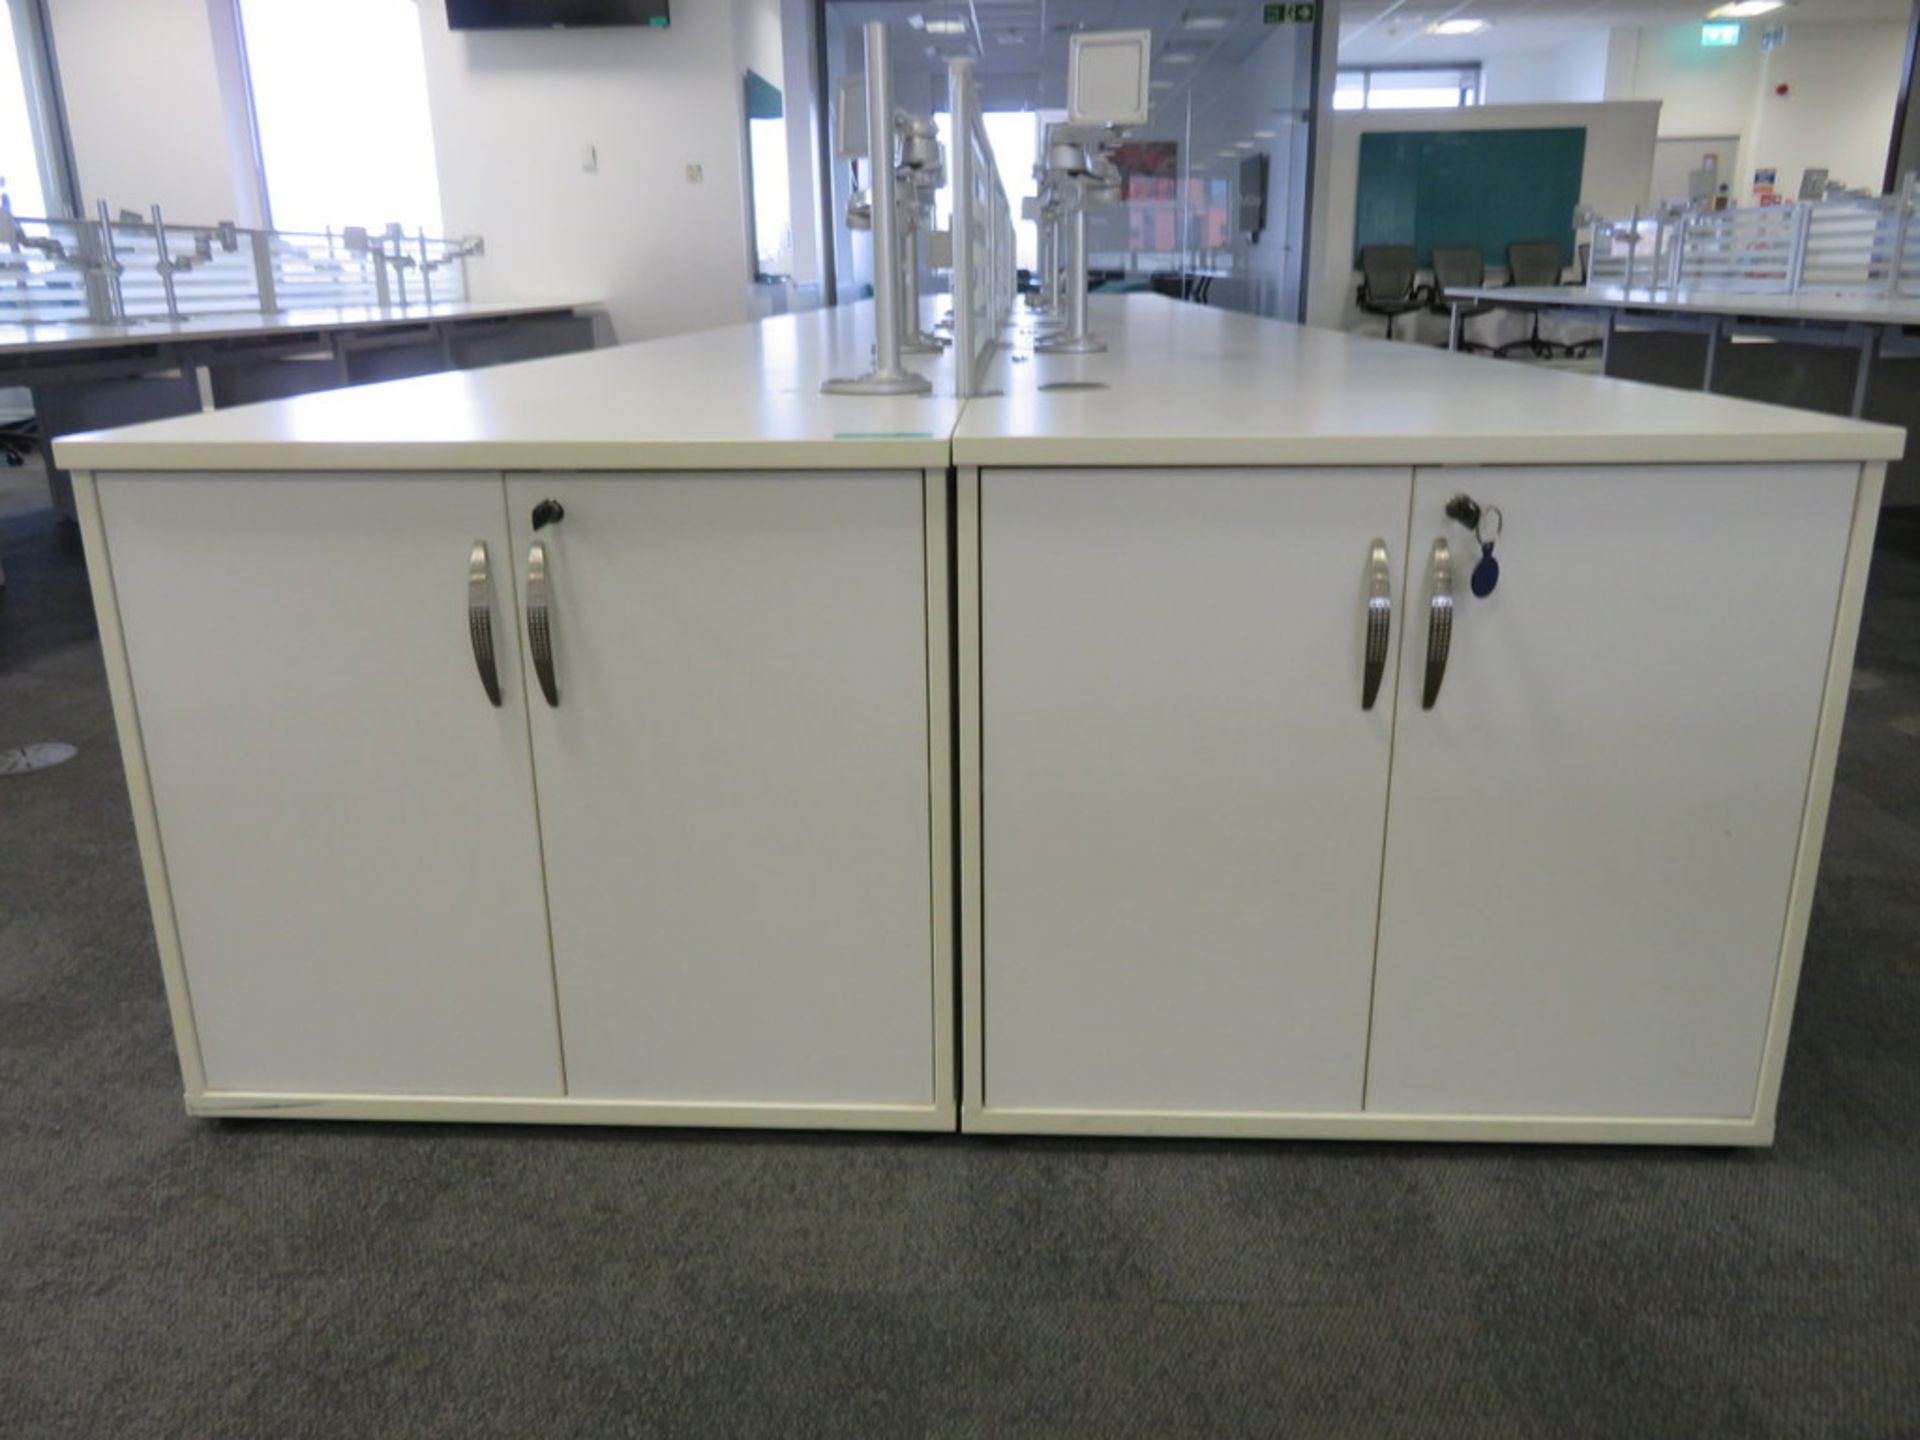 12 Person Desk Arrangement With Dividers, Monitor Arms & Storage Cupboards. - Image 3 of 4